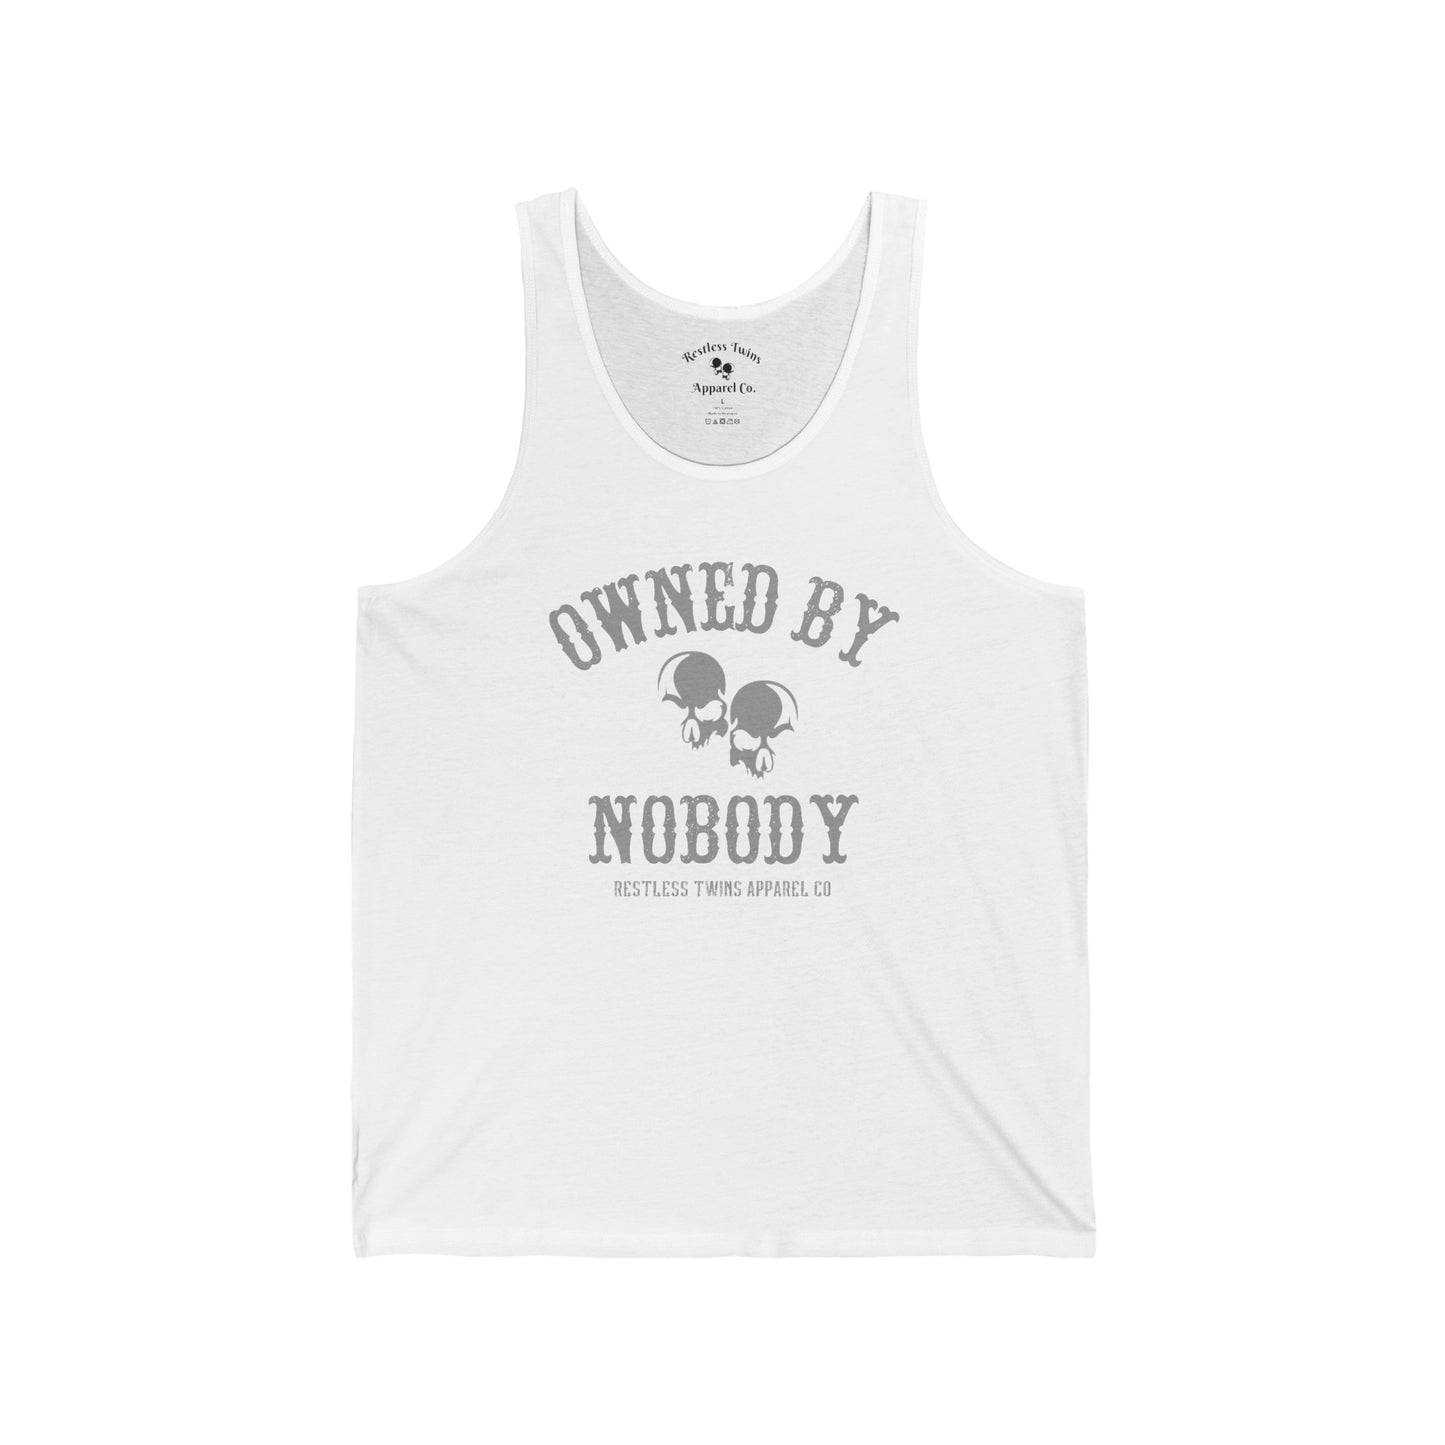 Owned by Nobody Men's Tank Top